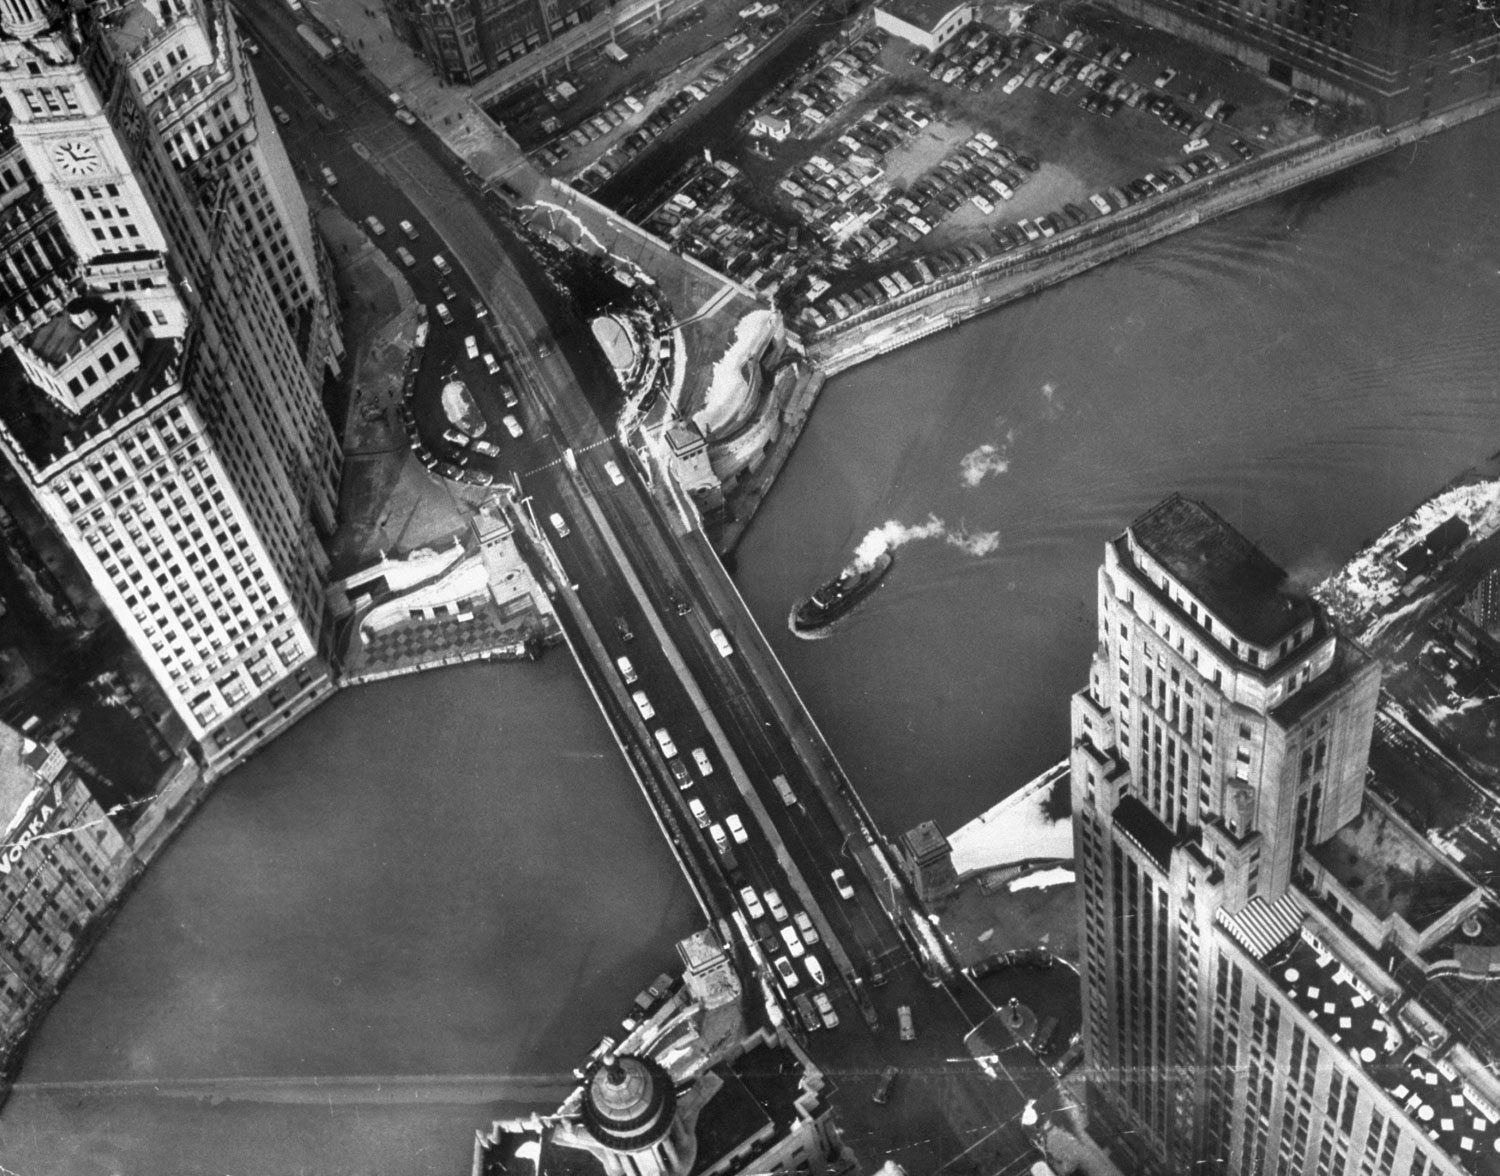 Caption from LIFE.  Chicago's famous Wrigley Building looks like candy castle from a helicopter above spire. Building is split in two parts and a railroad track runs between them. Behind them is Chicago River, with Michigan Avenue bridge.